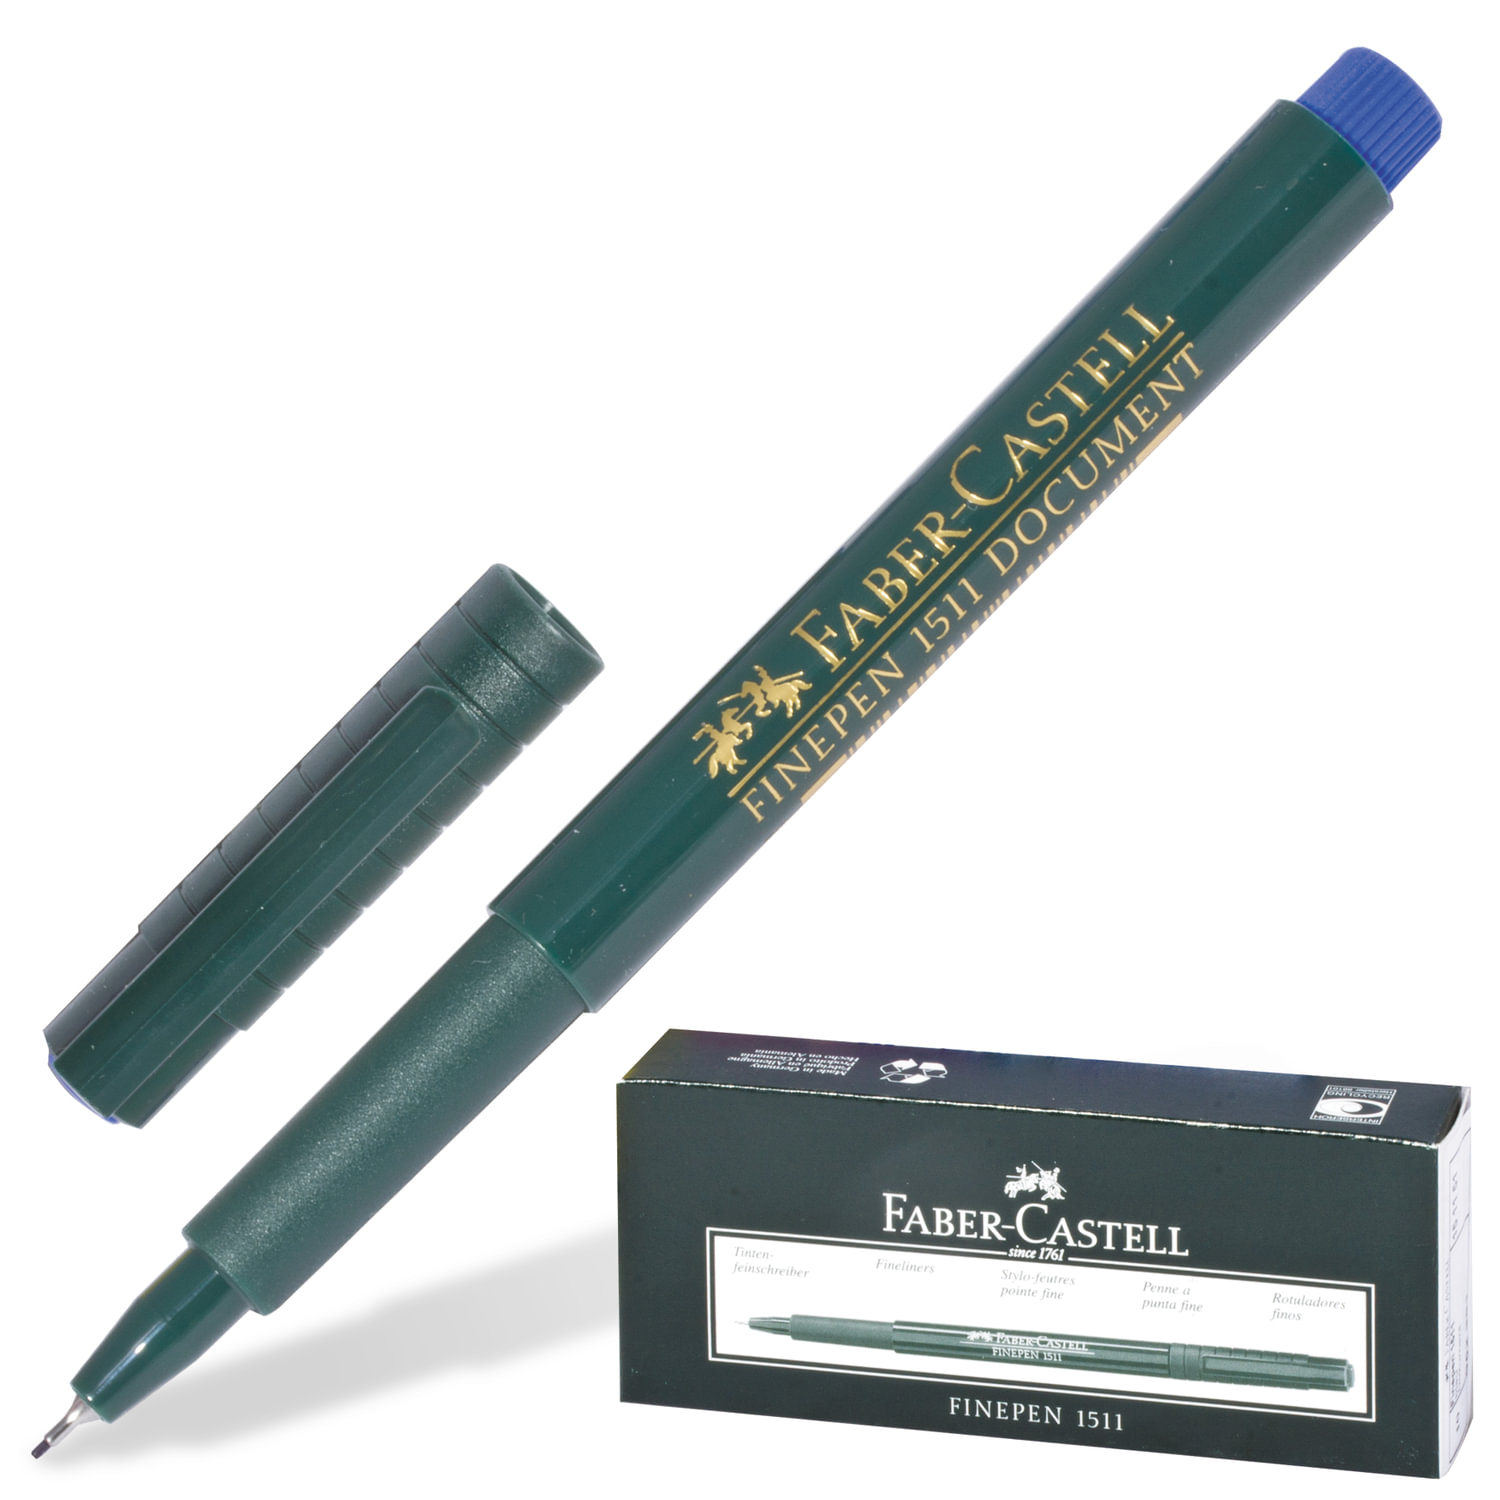  FABER-CASTELL 151151,  10 .